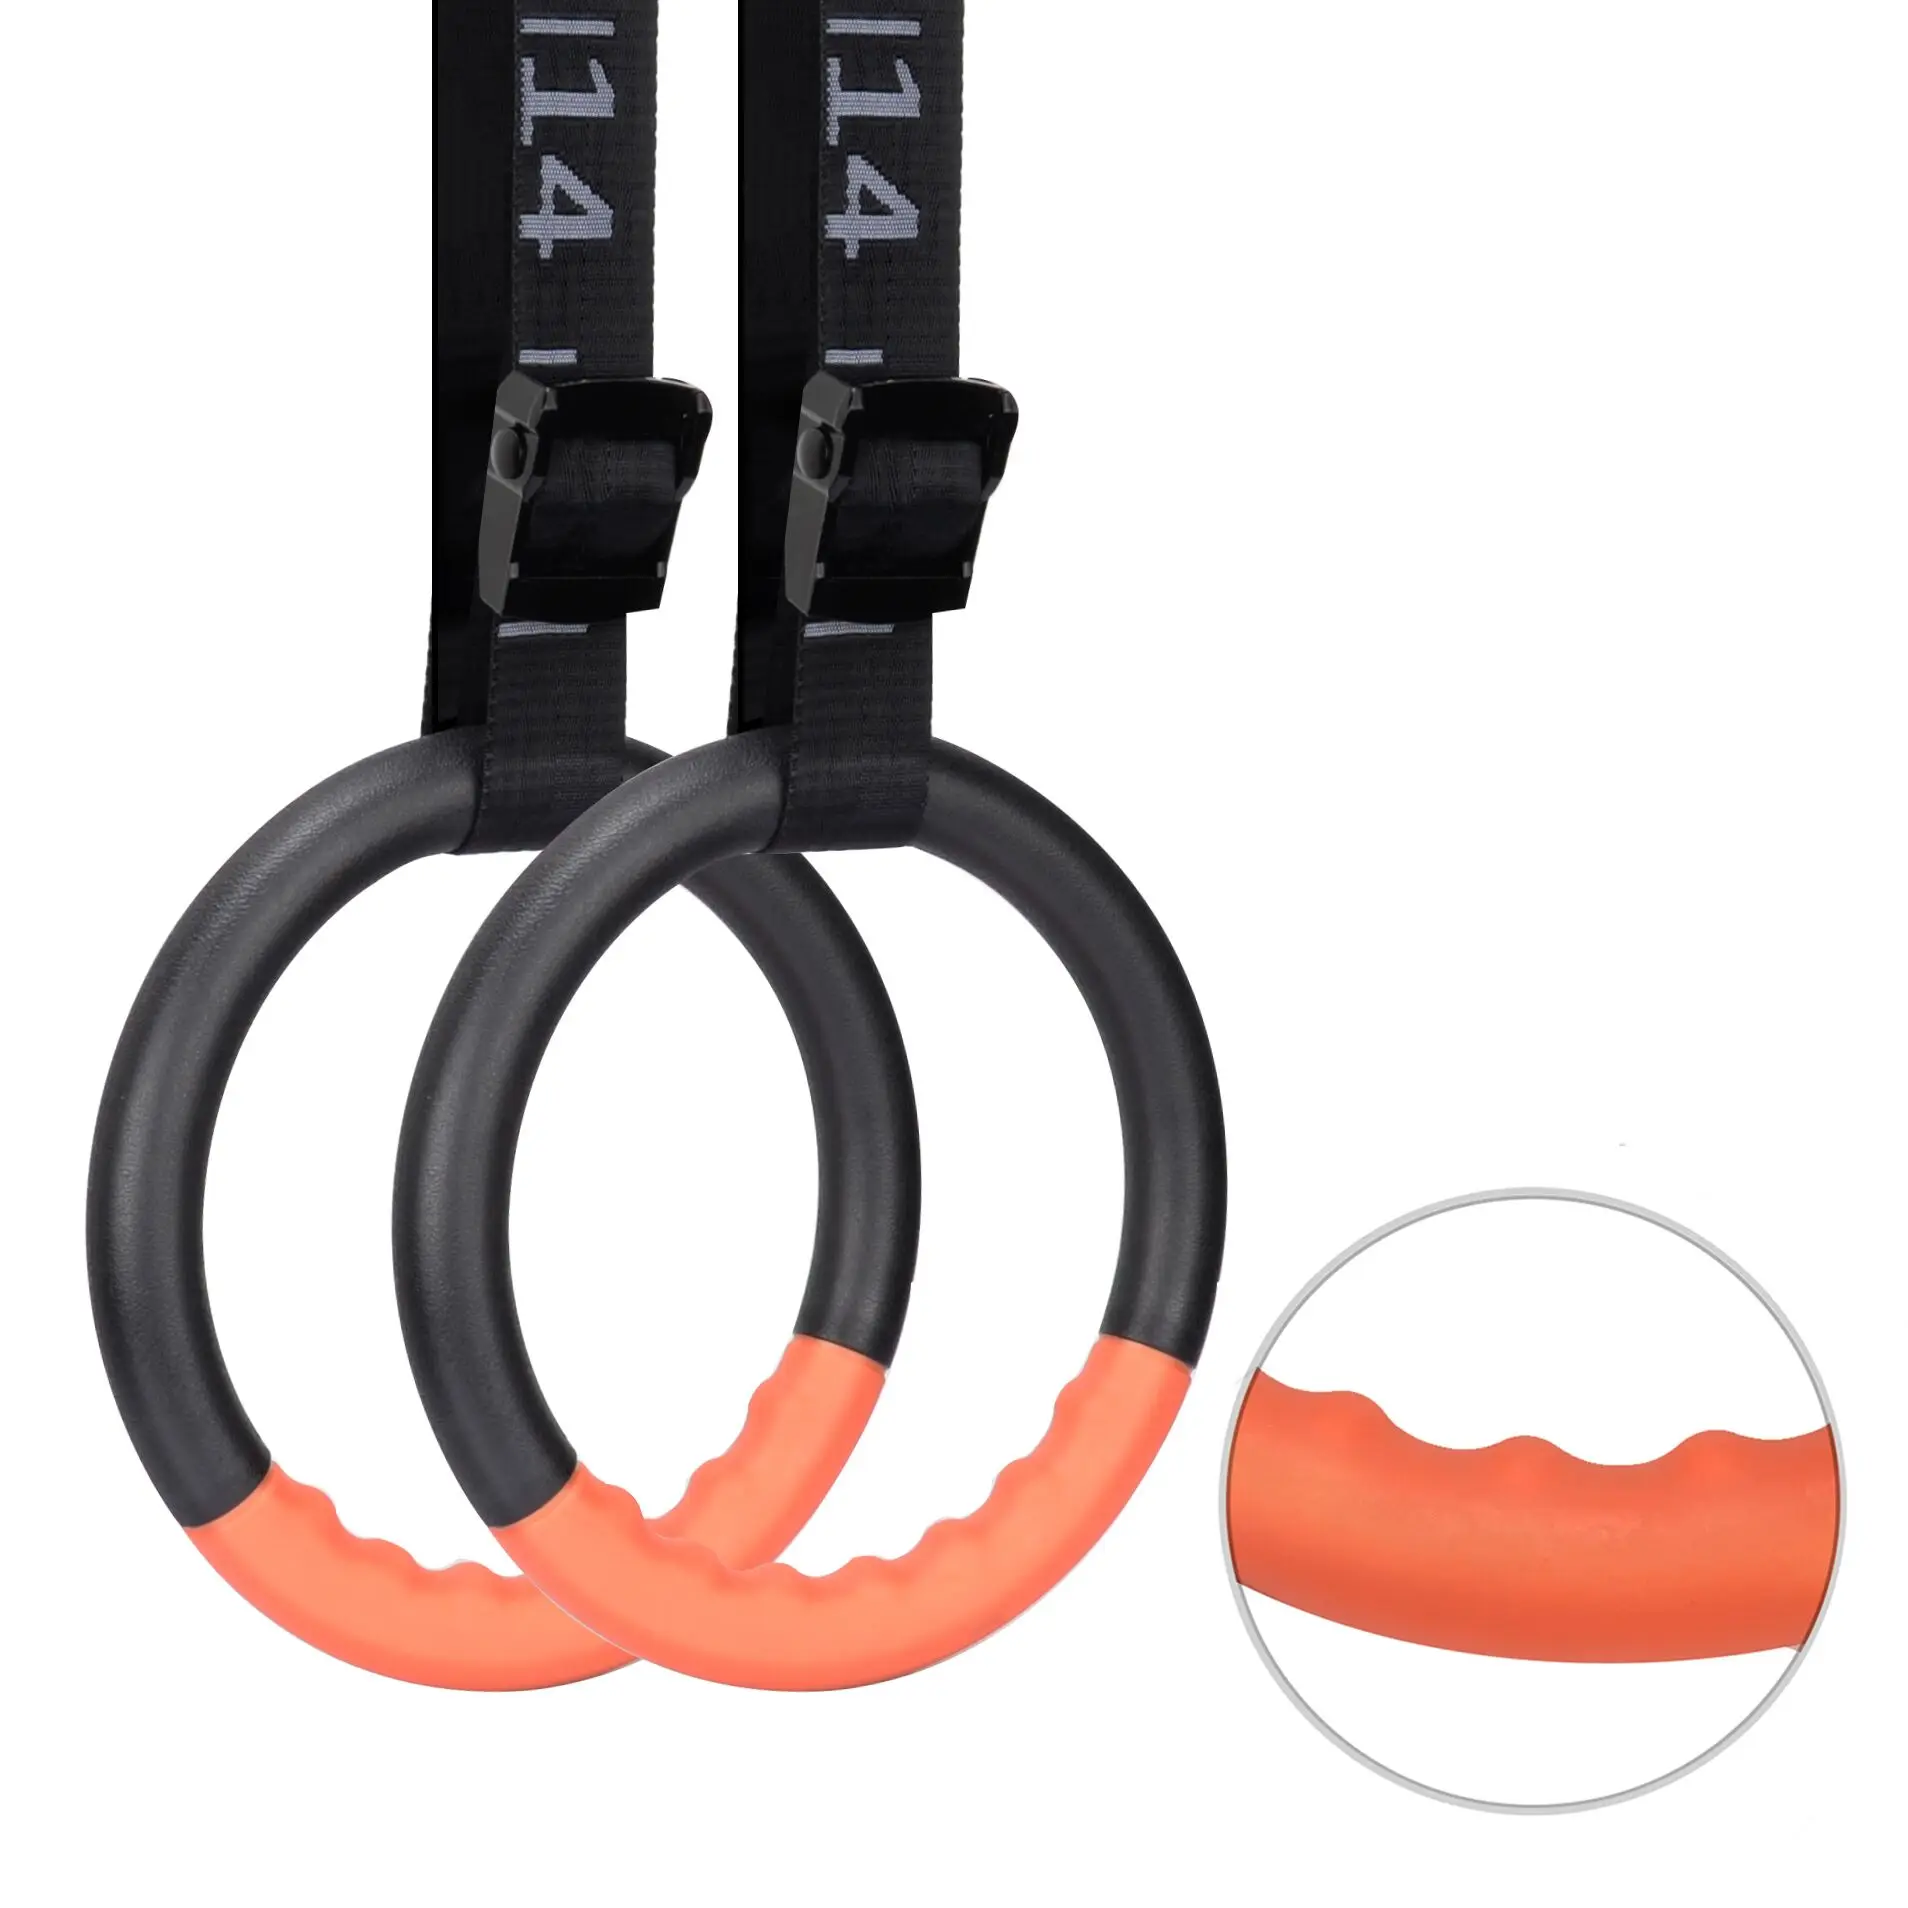 Non-Slip Gymnastics Rings With 15 FT Adjustable Buckle Straps Aerial Hoop Pull Up Workout For Fitness Exercise Strength Training